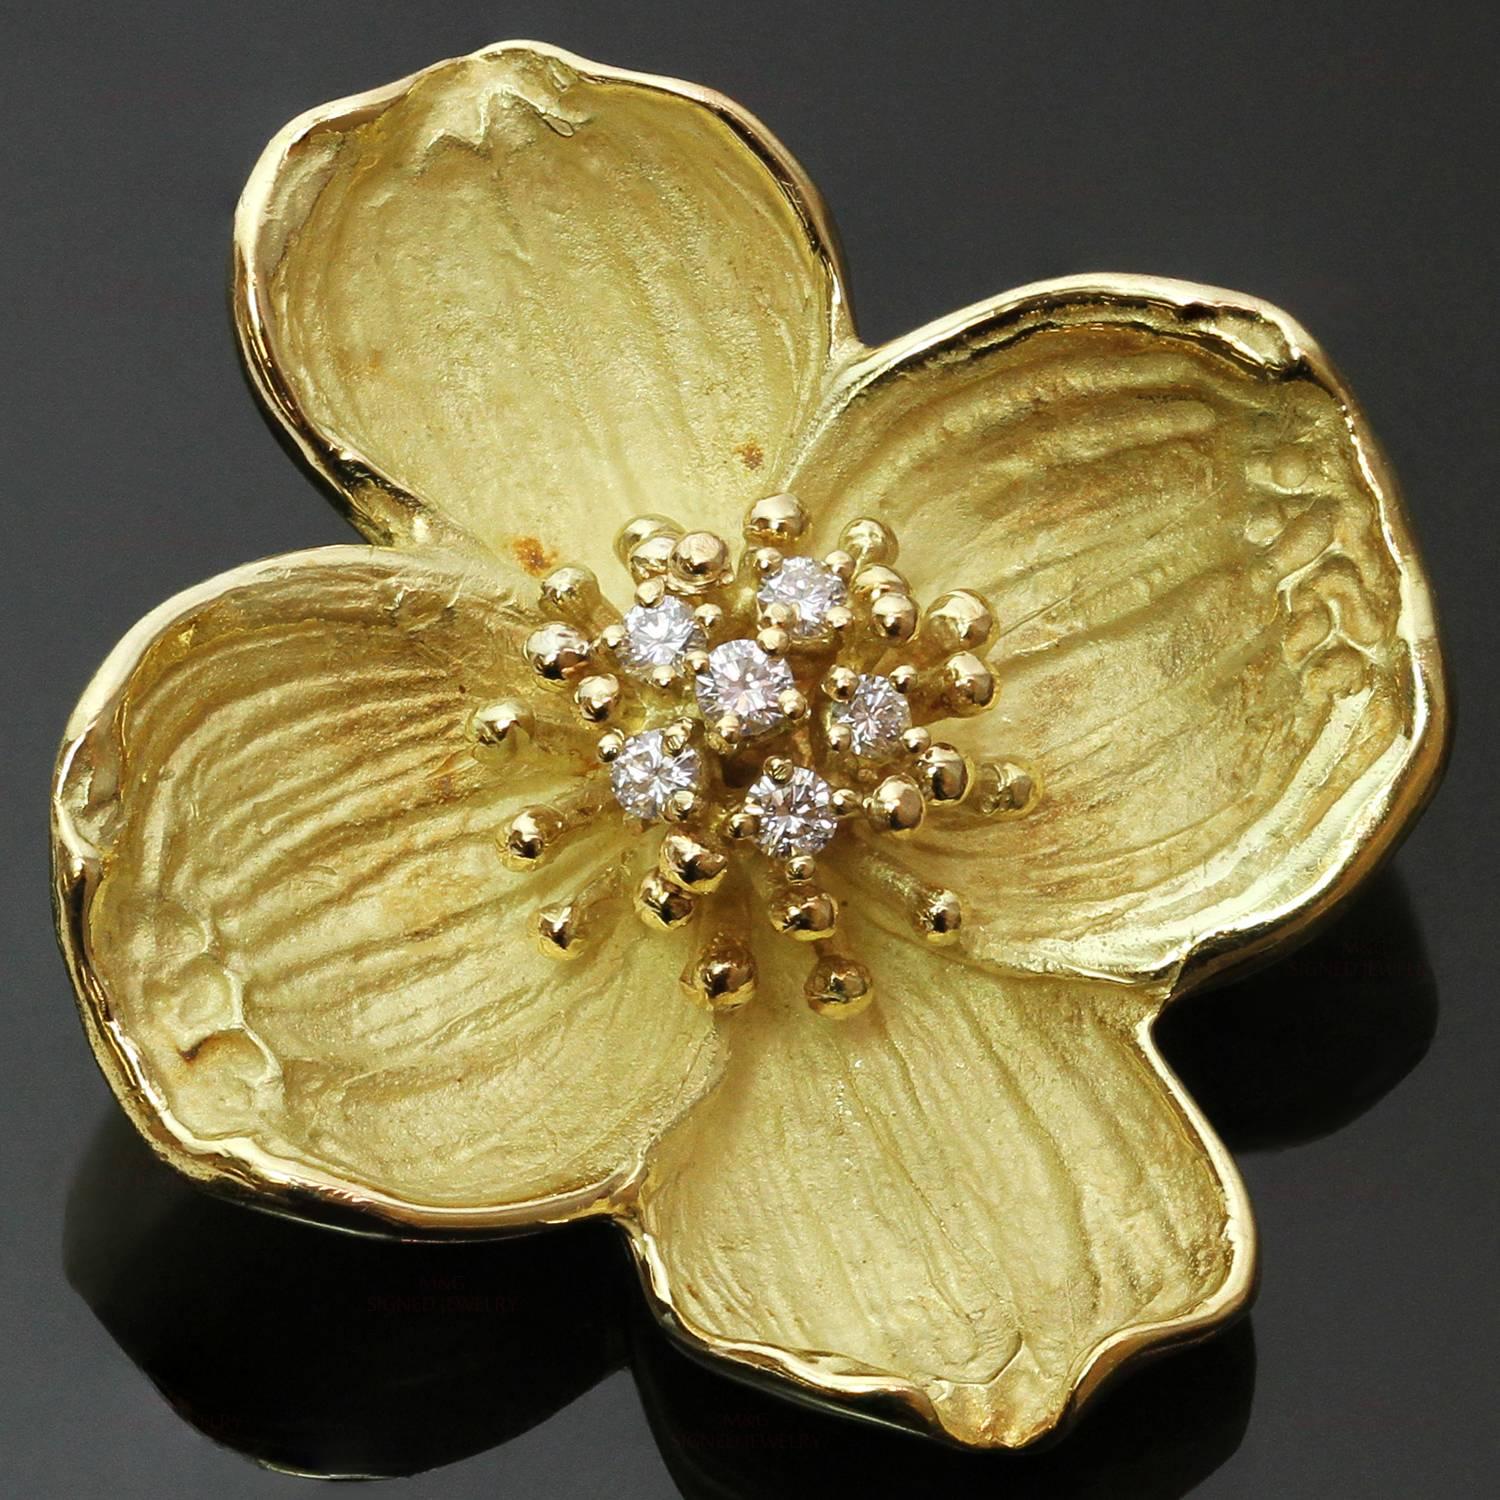 This classic Tiffany brooch features a delicate dogwood flower design crafted in 18k yellow gold and accented with brilliant-cut round diamonds of an estmated 0.20 carats. Made in United States circa 1980s. Measurements: 1.25